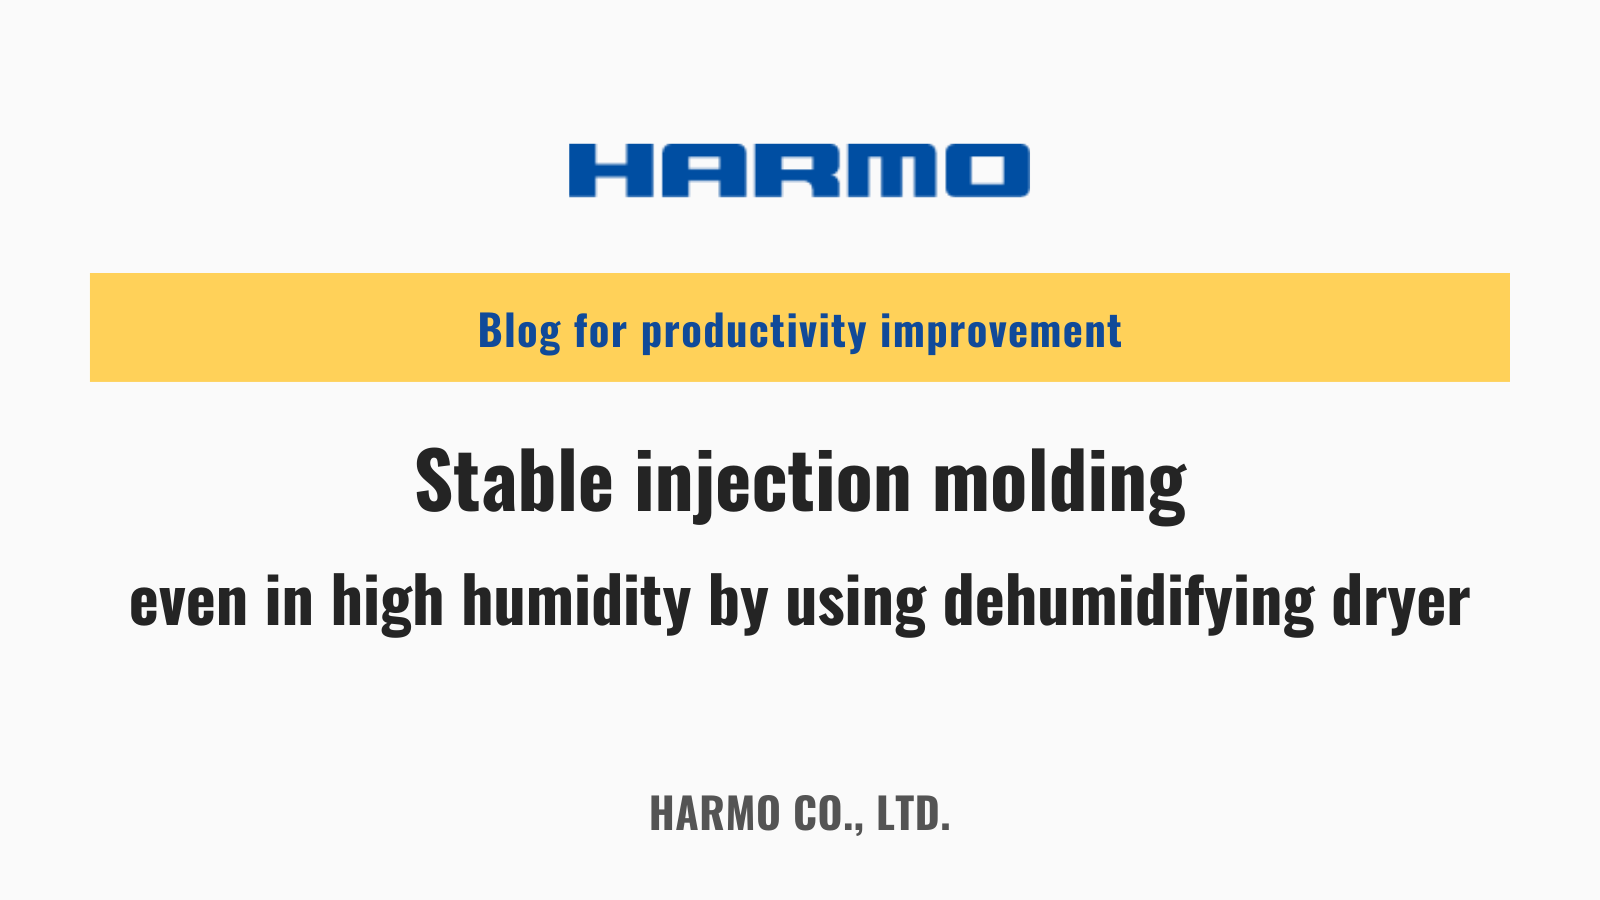 Stable injection molding even in high humidity by using dehumidifying dryer